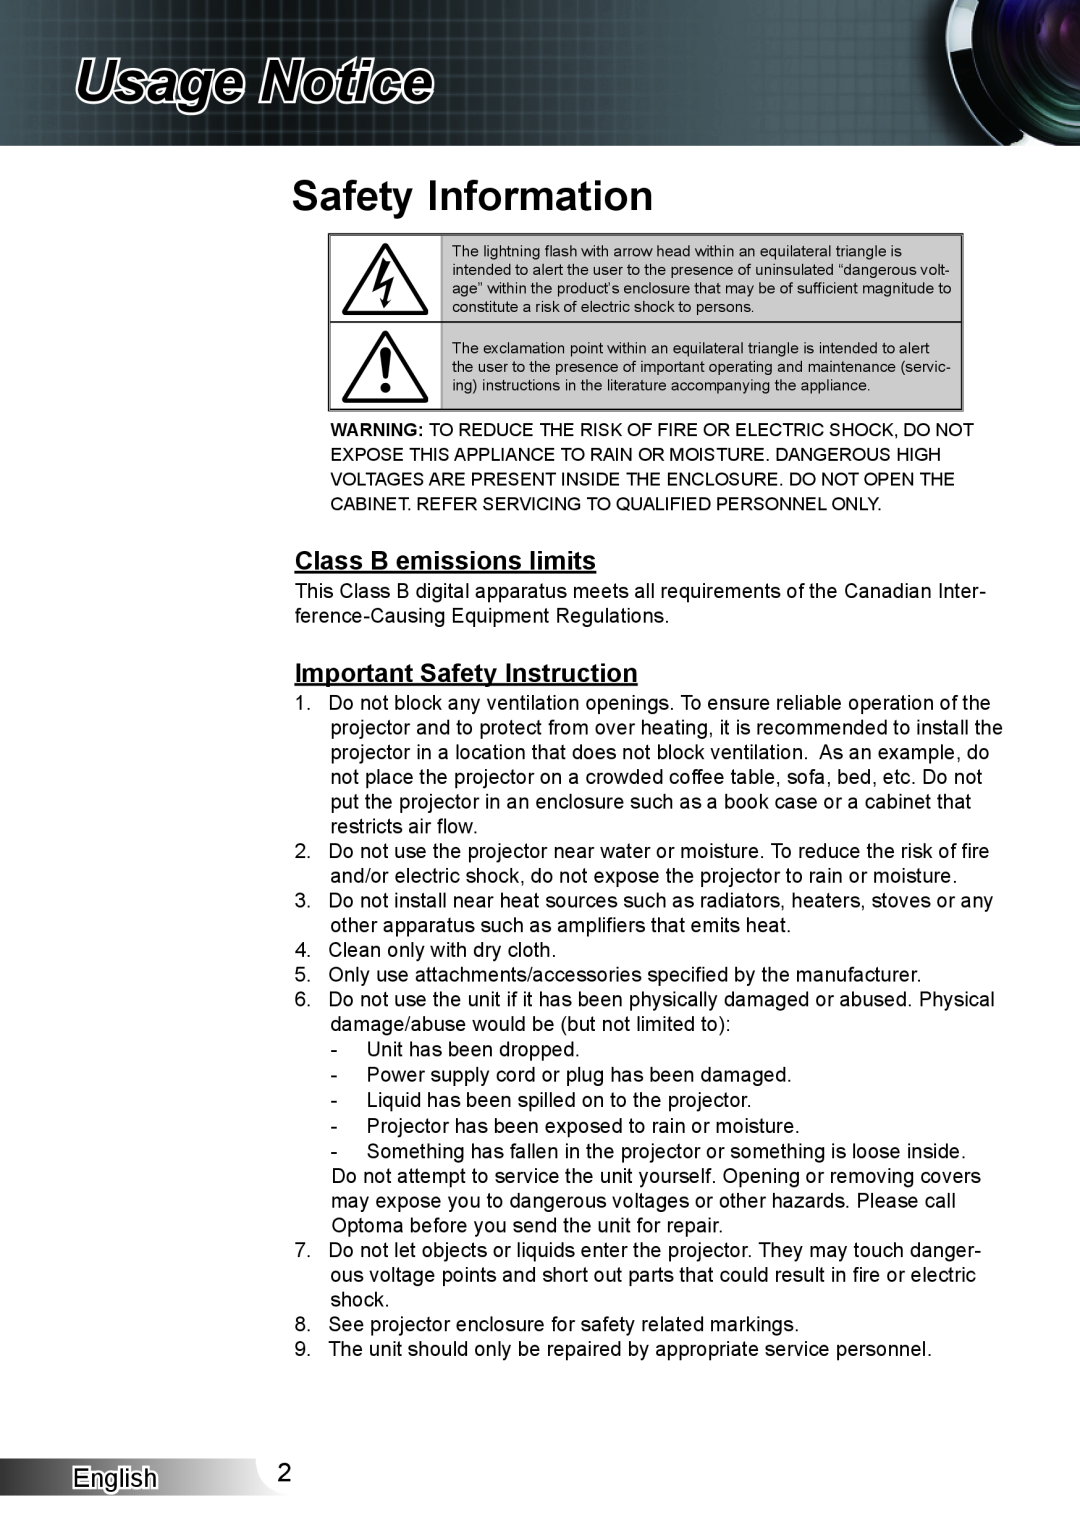 Optoma Technology XX152 N manual Usage Notice, Safety Information, Class B emissions limits, Important Safety Instruction 